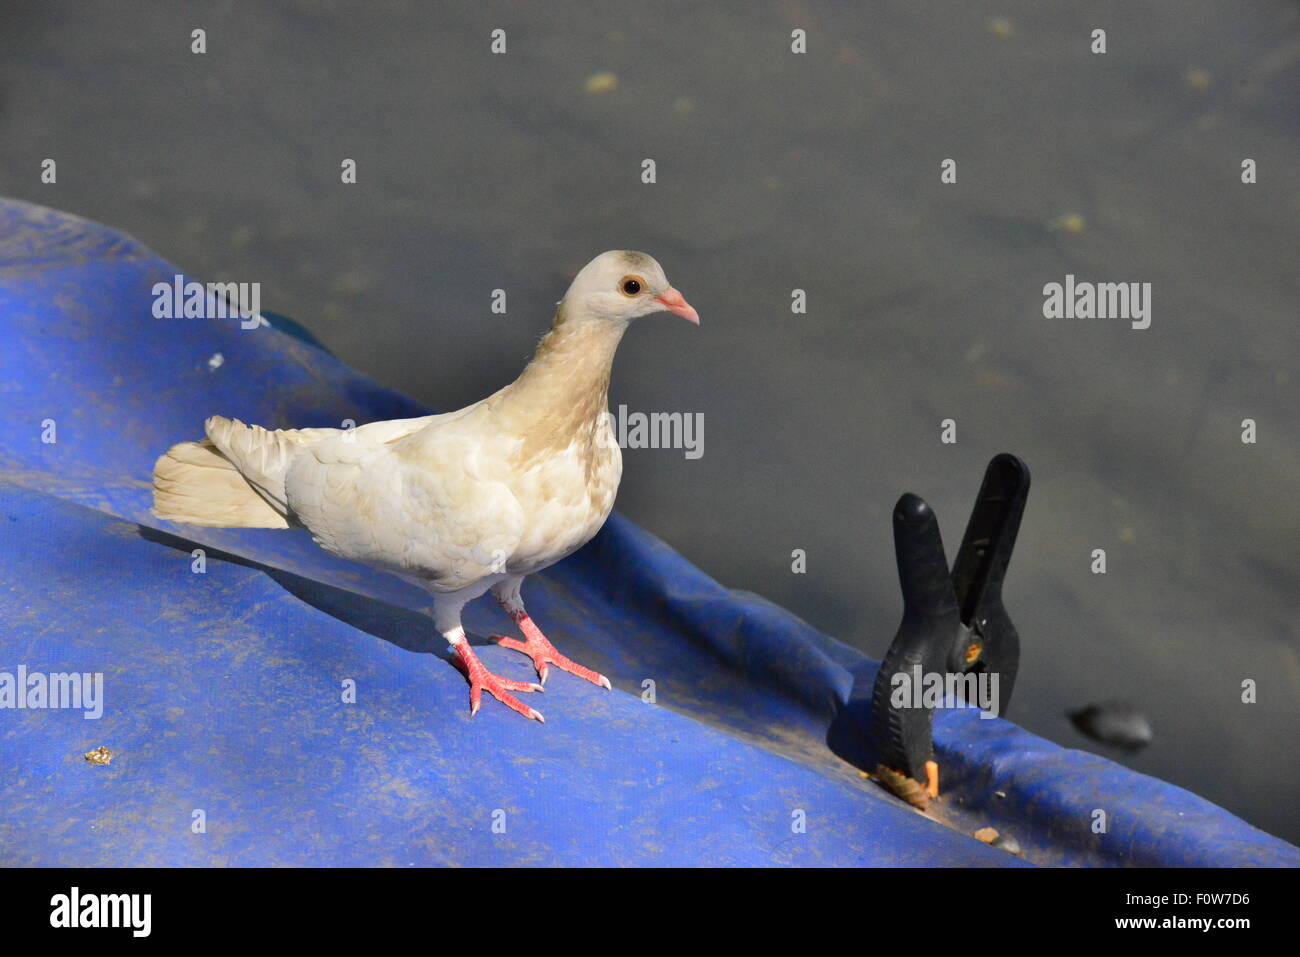 A white Dove on a roof in England Stock Photo